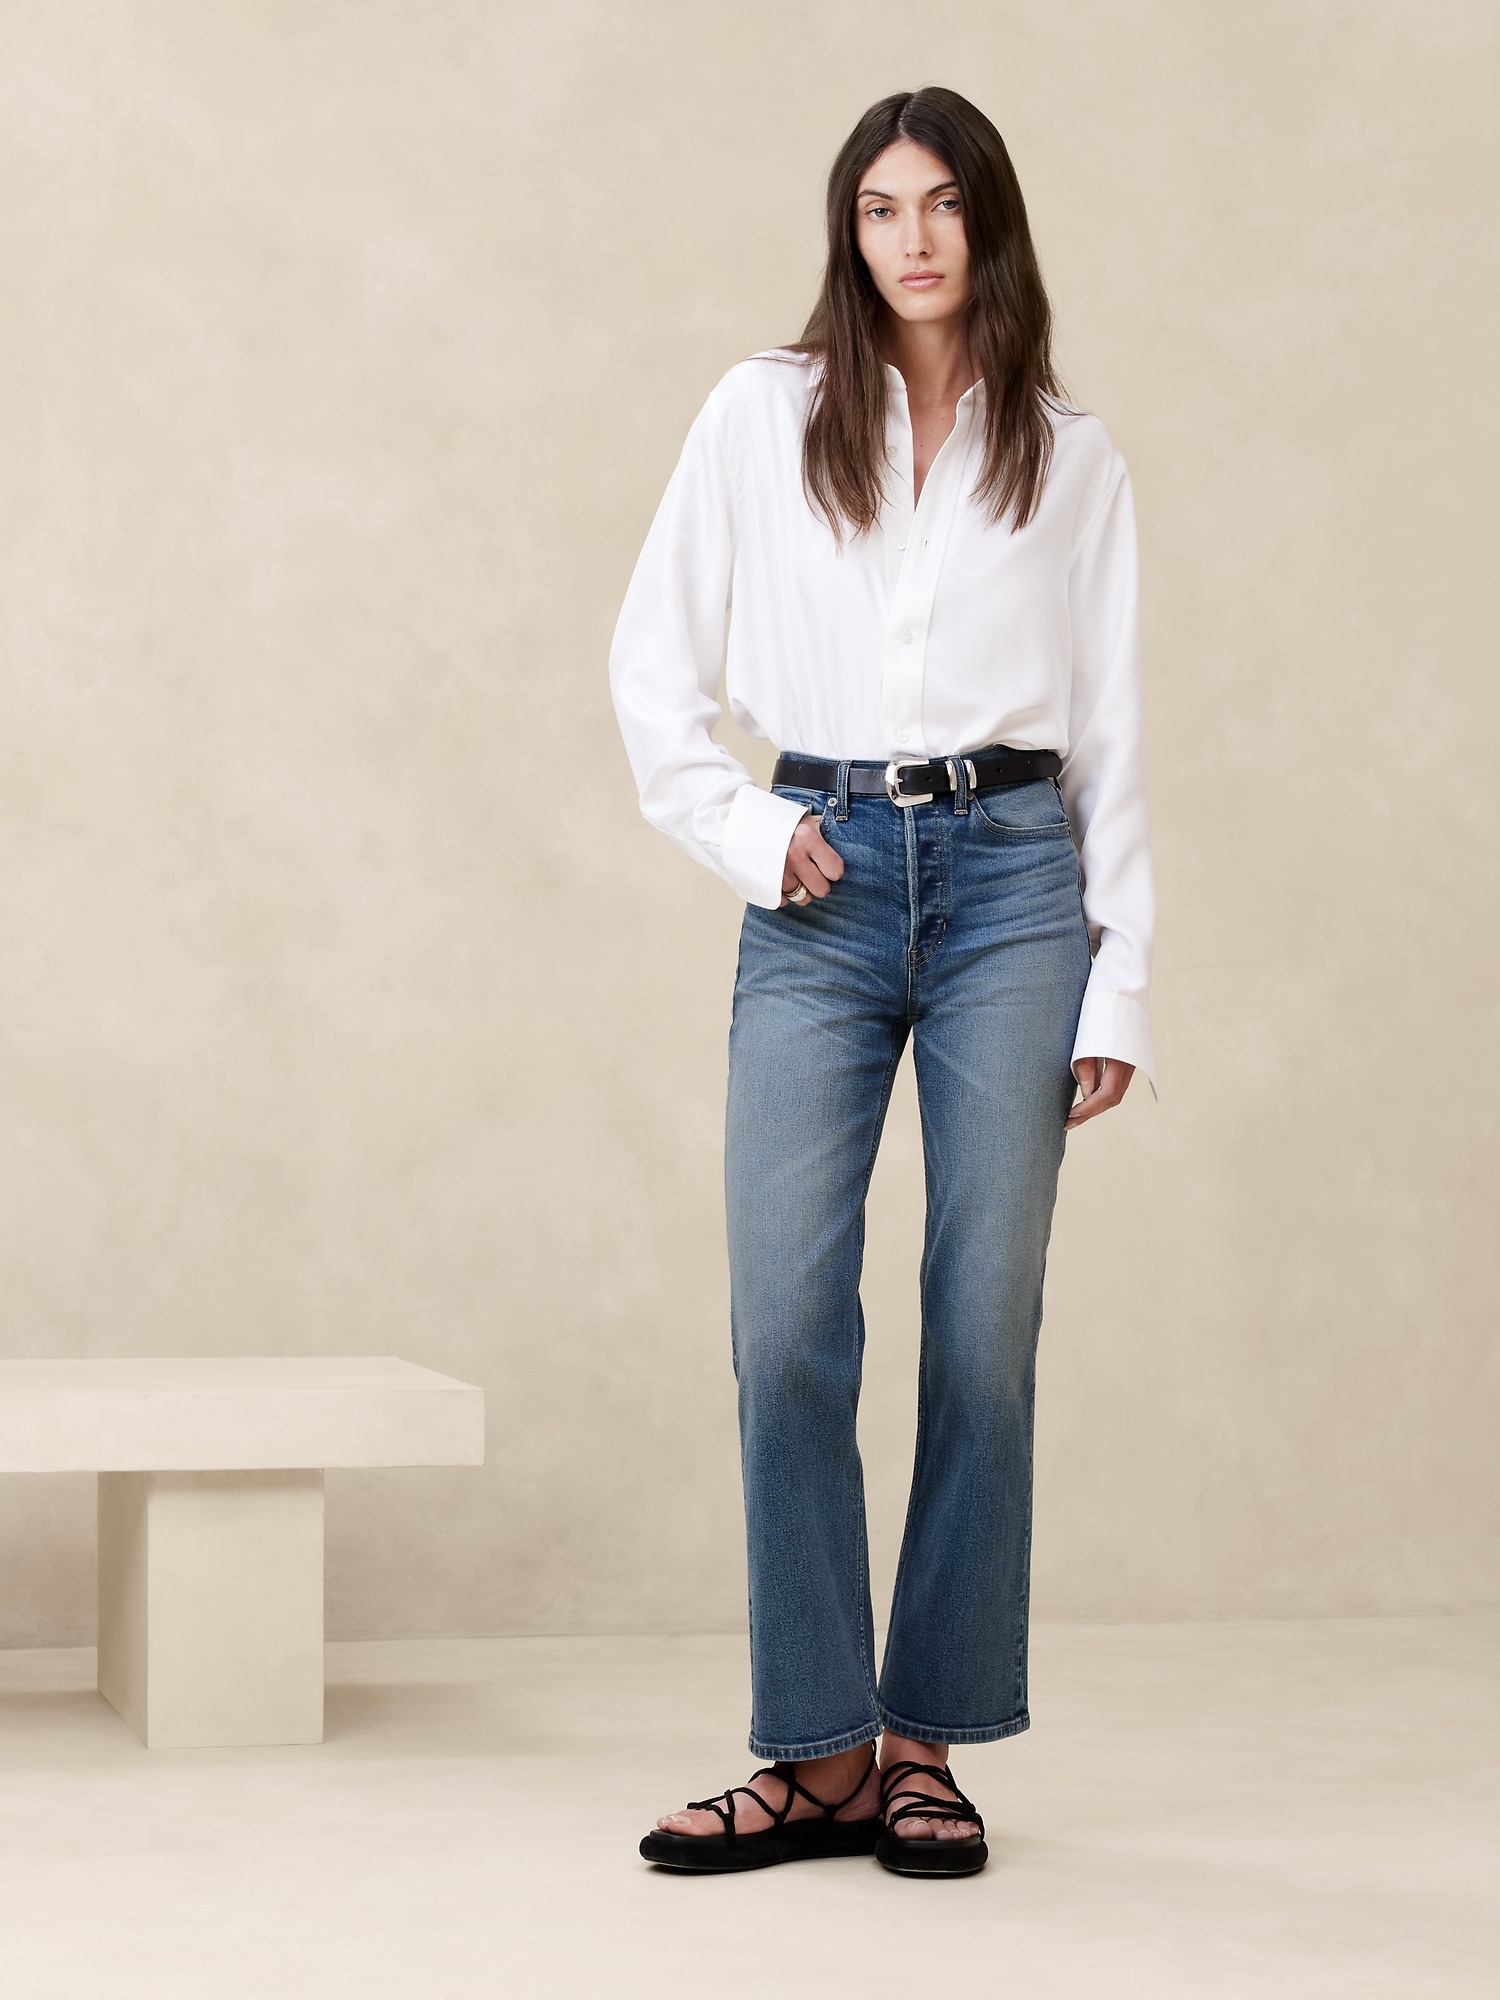 AE Luxe Super High-Waisted Flare Jean